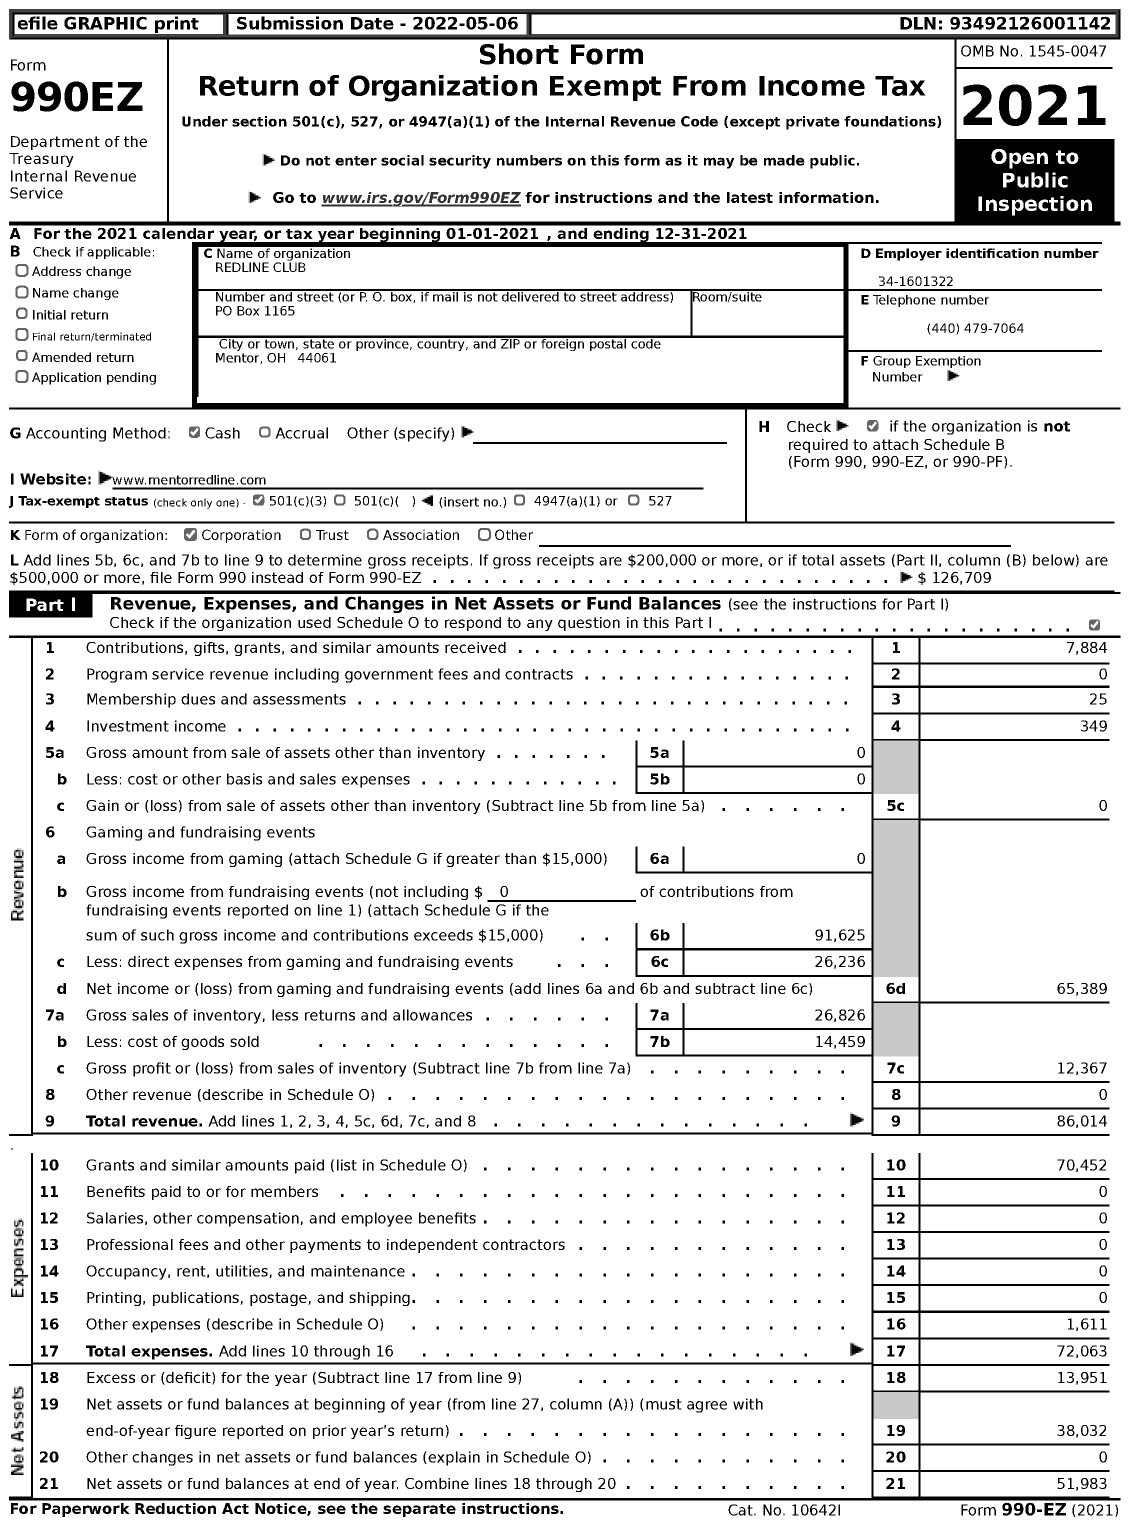 Image of first page of 2021 Form 990EZ for Redline Club